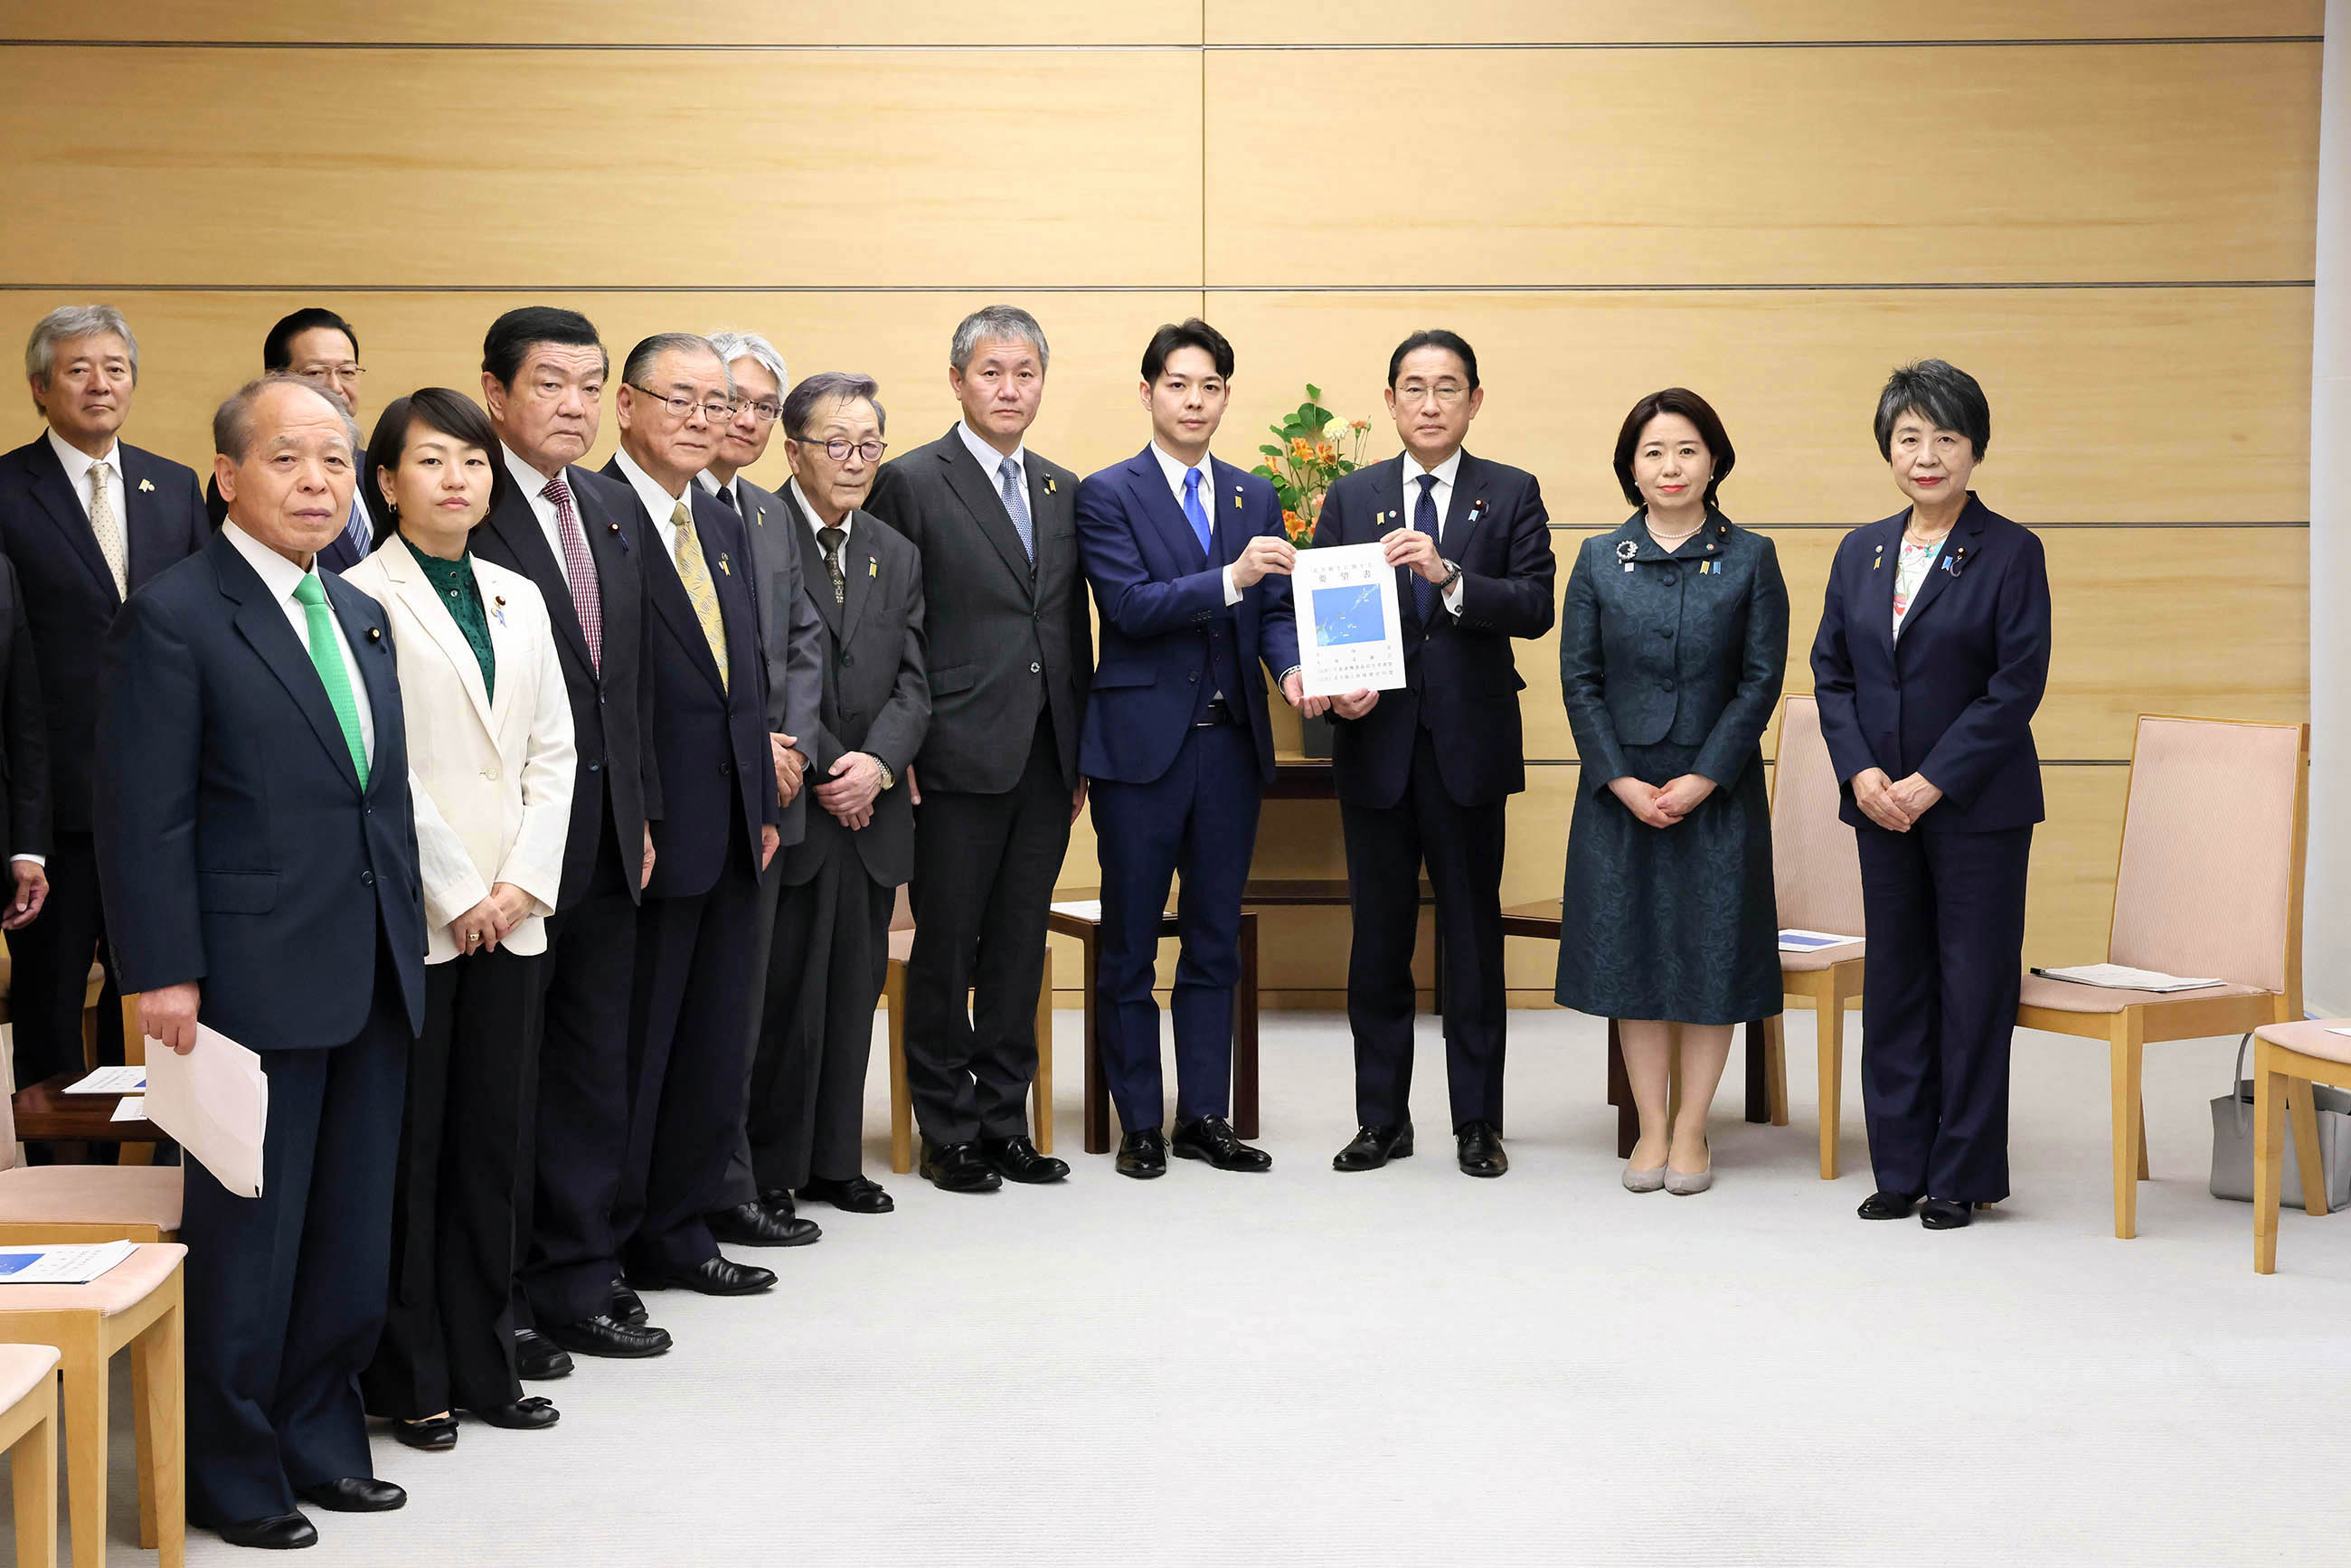 Request from the Governor of Hokkaido on the Resolution of the Northern Territories Issue and Other Matters